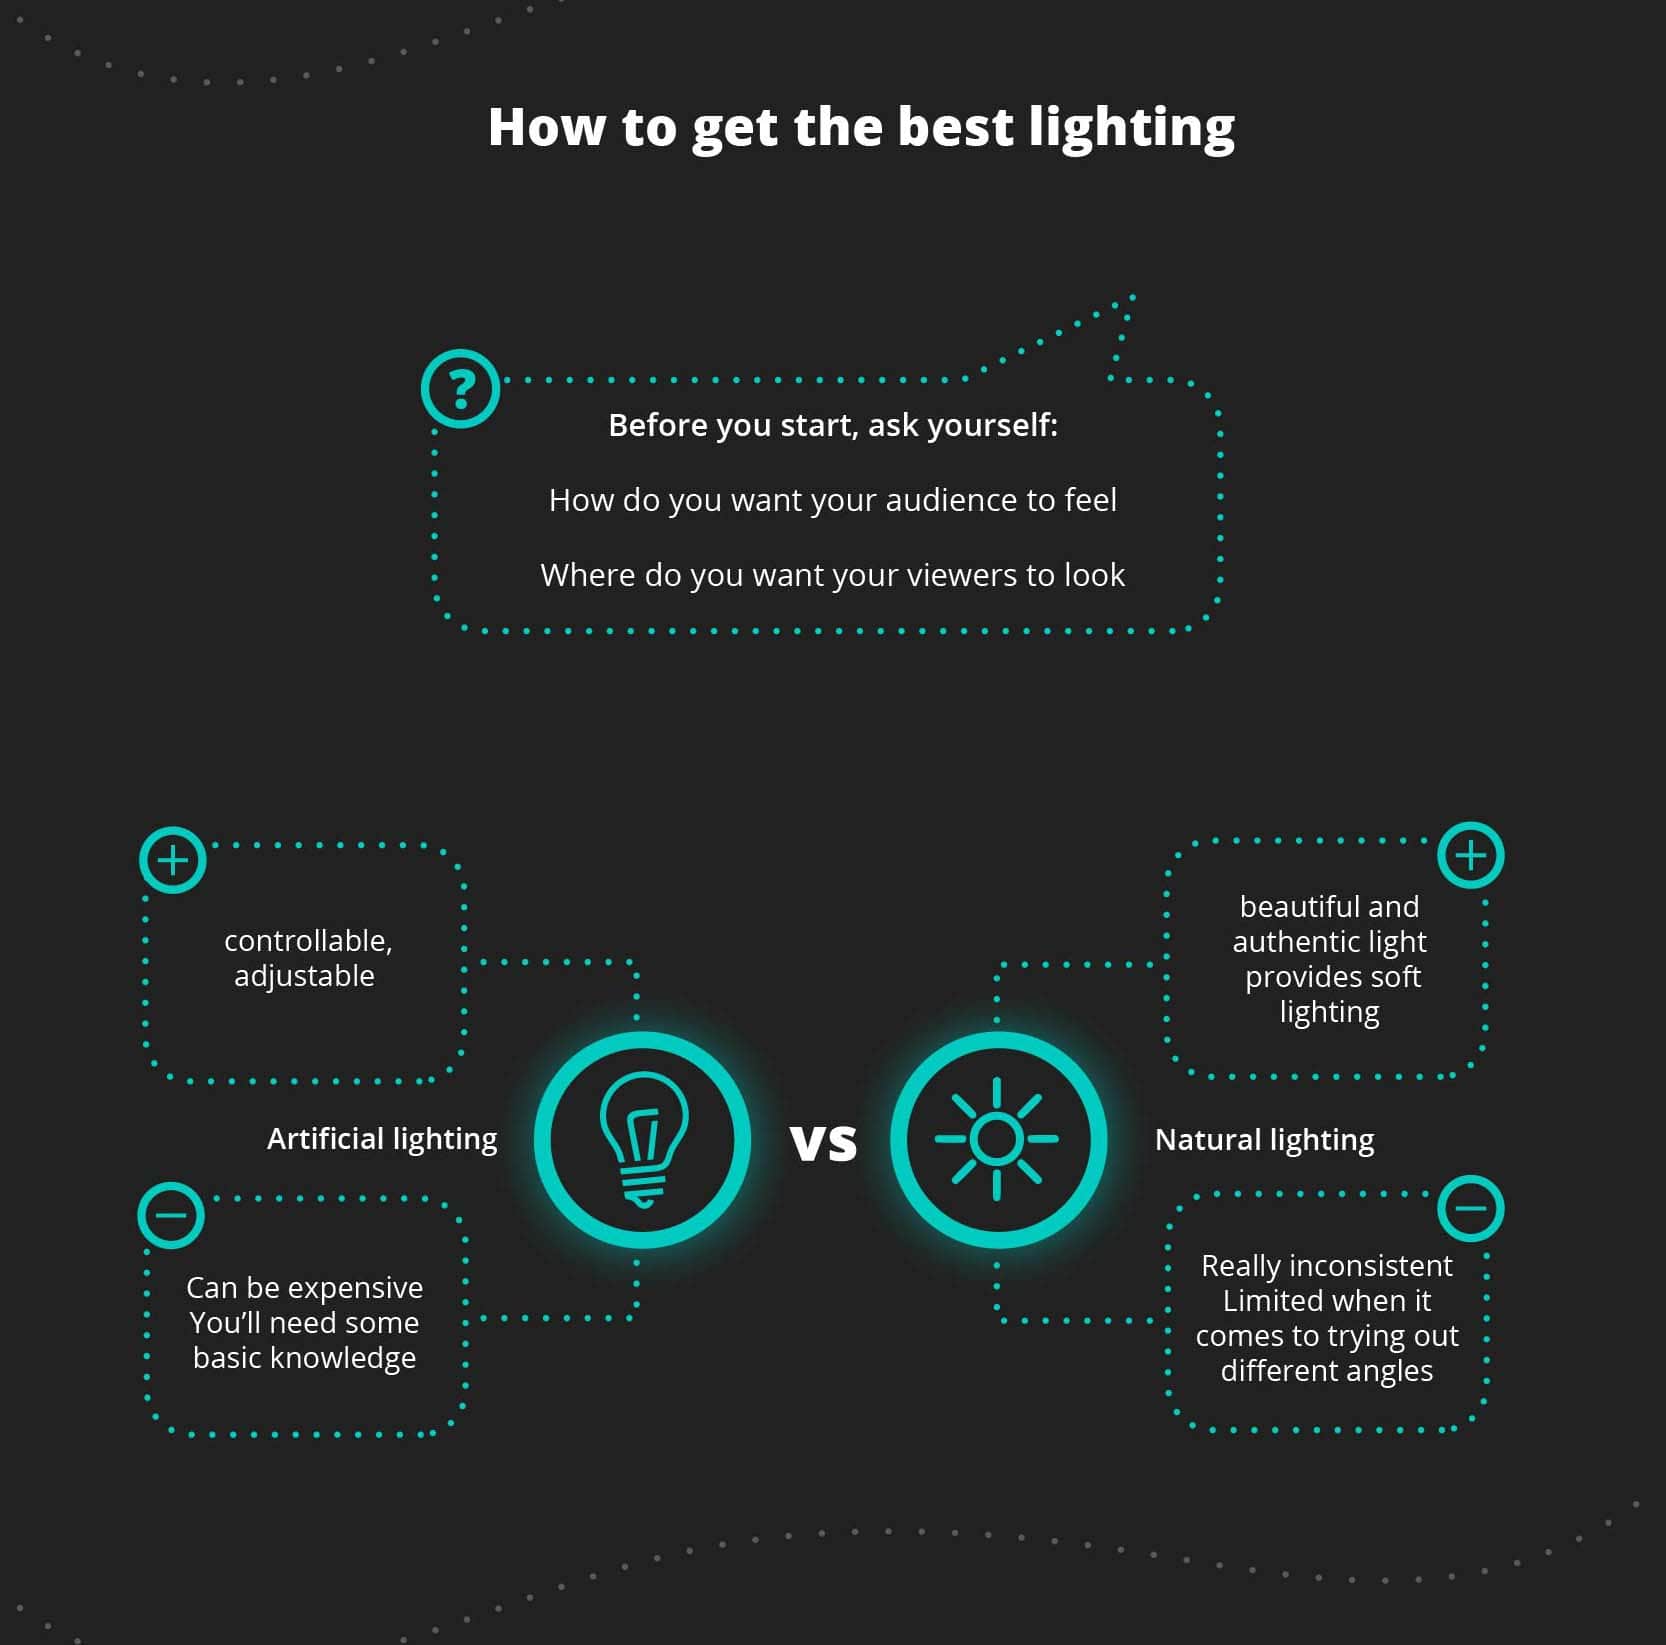 How to get the best lighting, what do you need to think of before getting started, natural lighting vs. artificial lighting